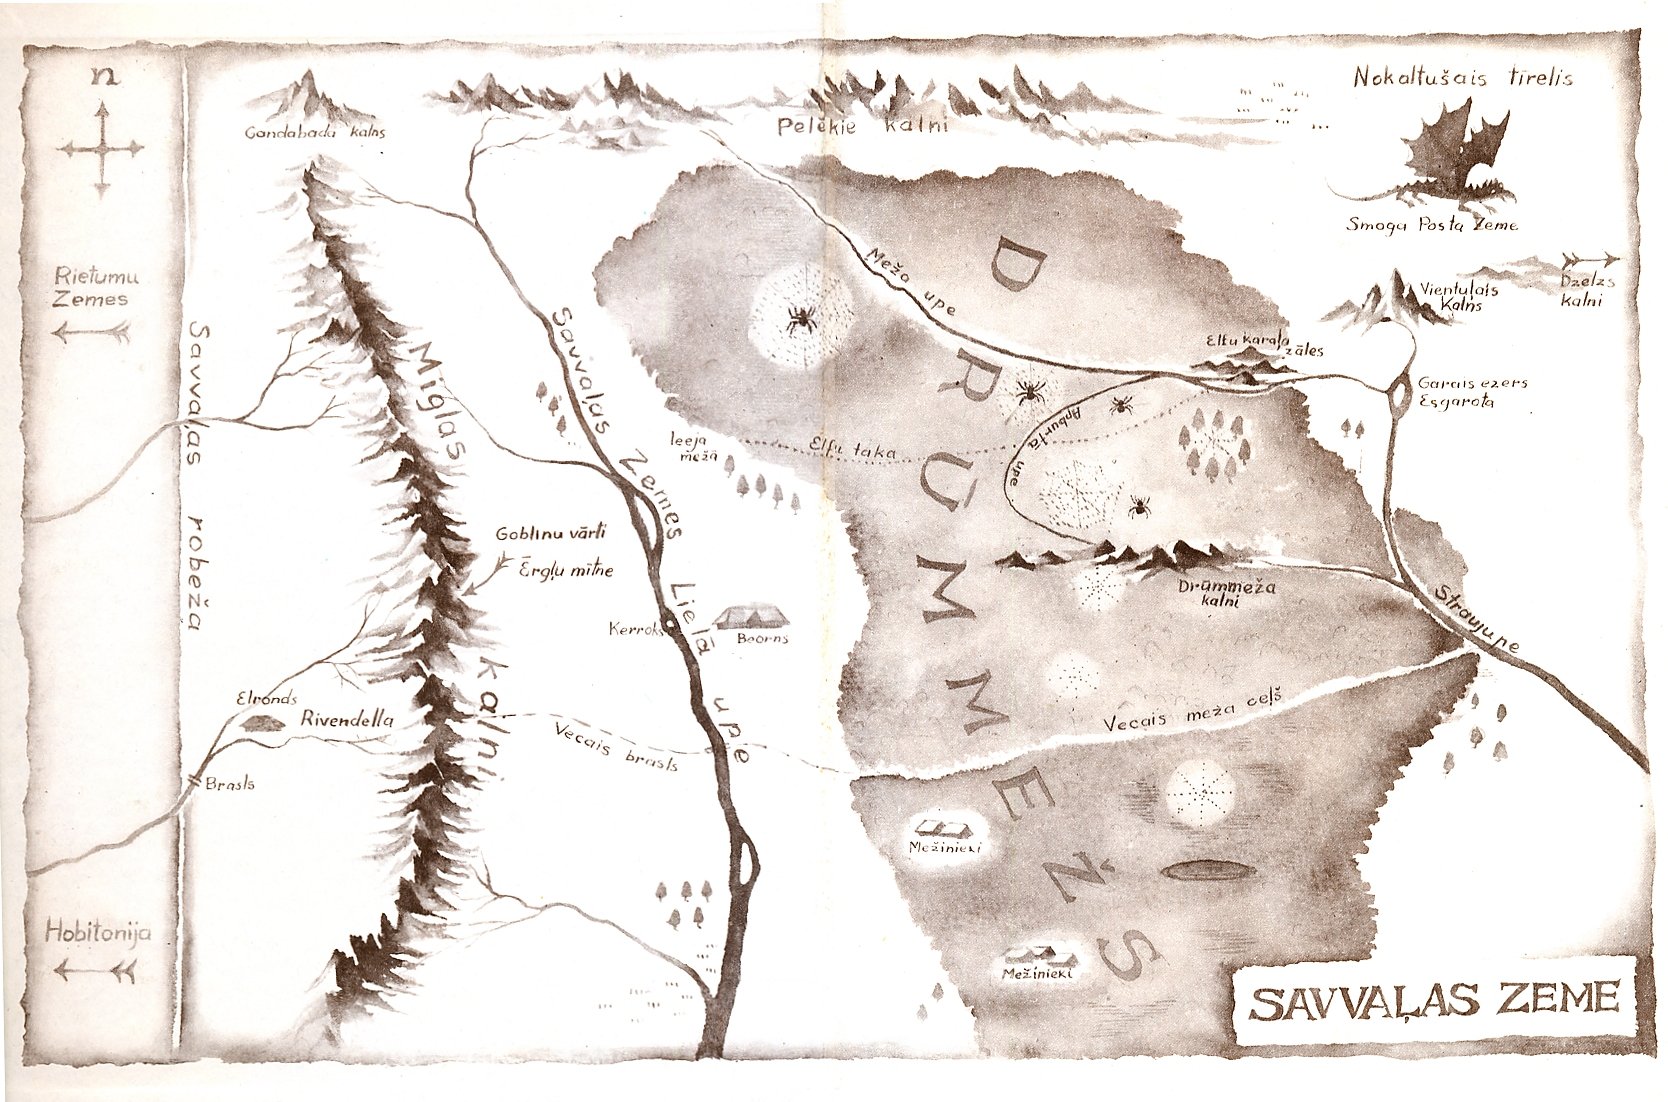 Maps from the Hobbit